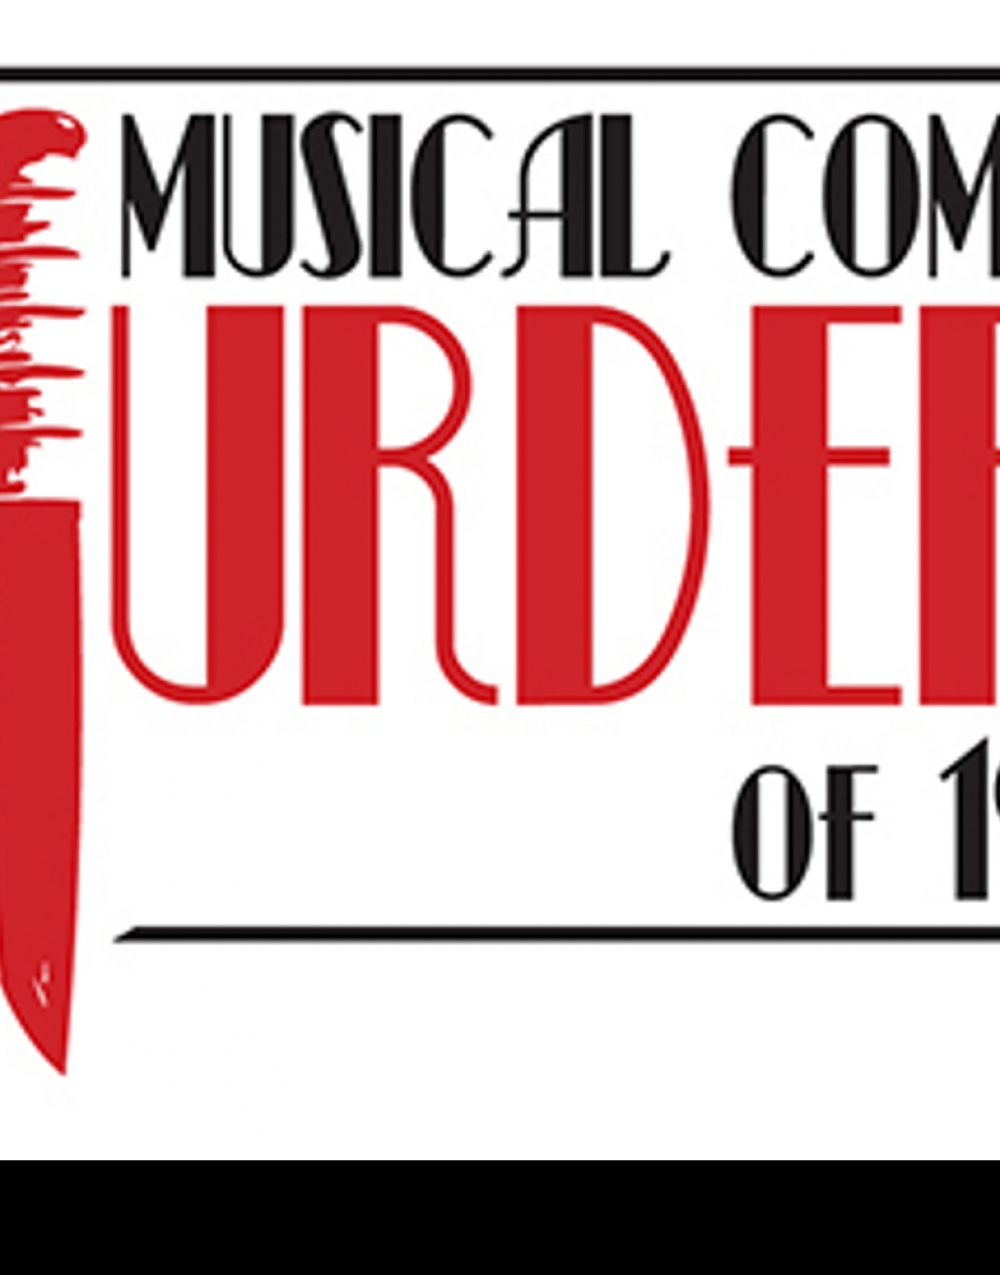 The Musical Comedy Murders of 1940 - Ironwood Ridge High School Stage Mag